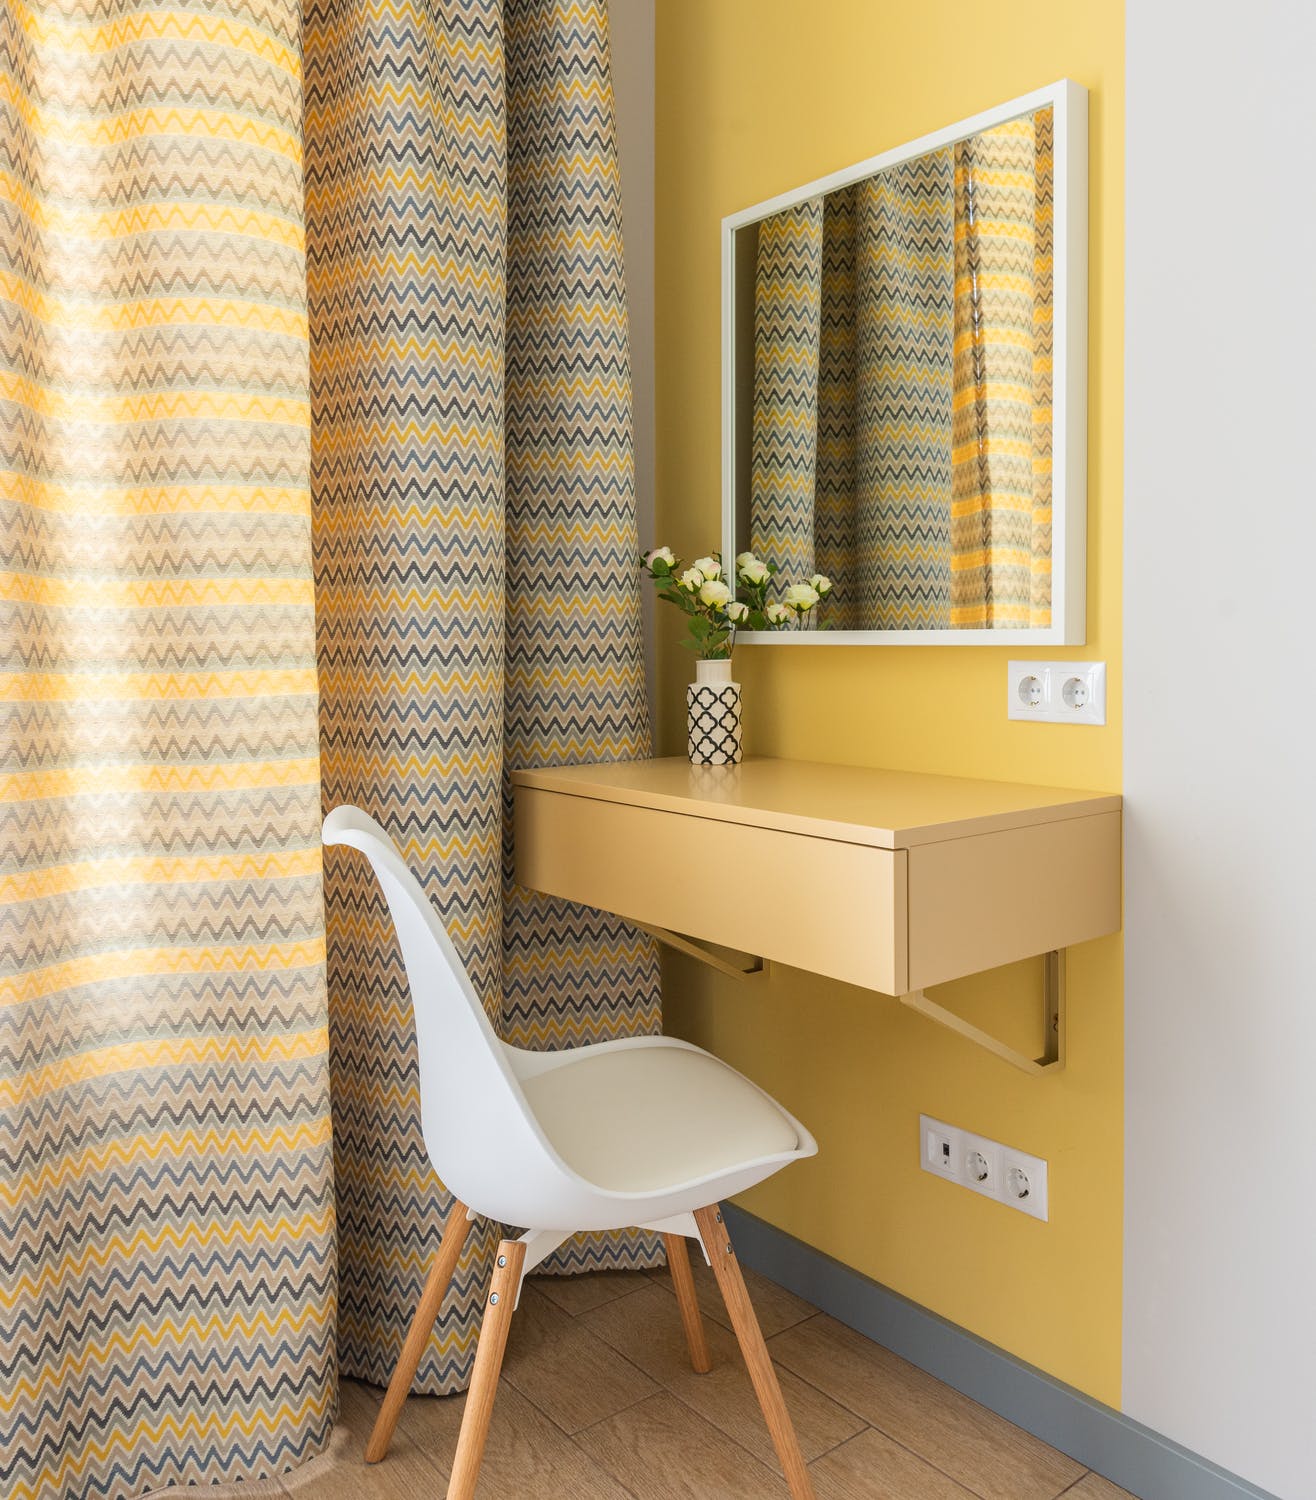 Interior of a room with a yellow neutral color. 